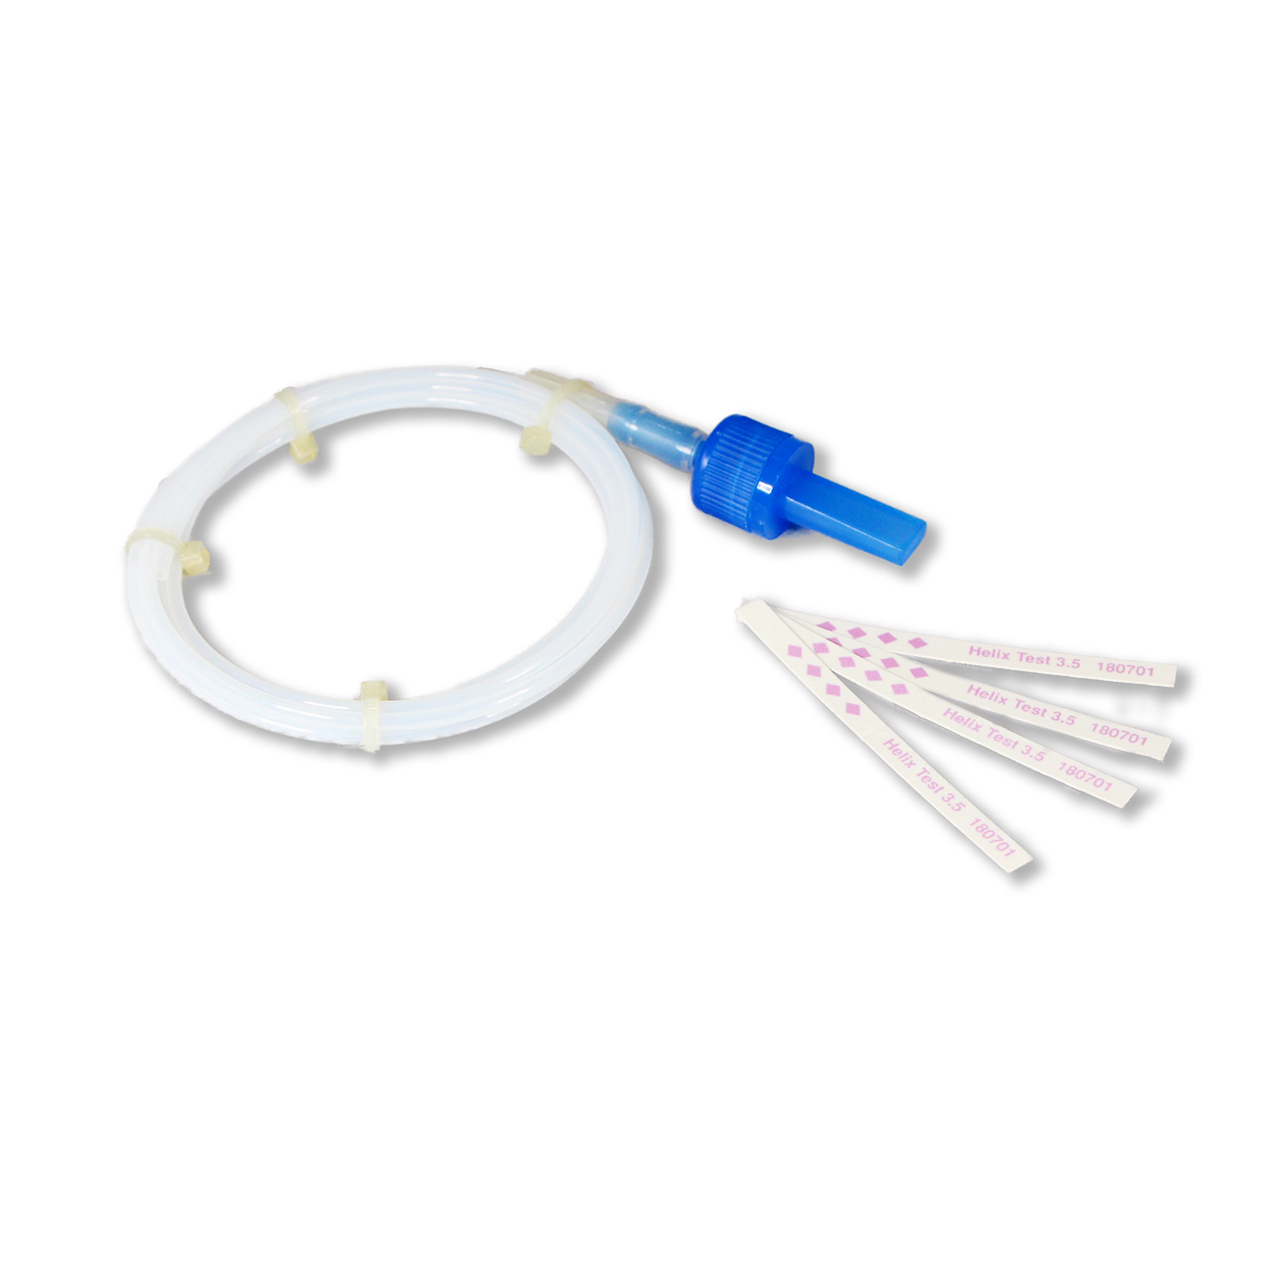 Getinge Assured Helix Tests is a reusable device with single use chemical indicator strips